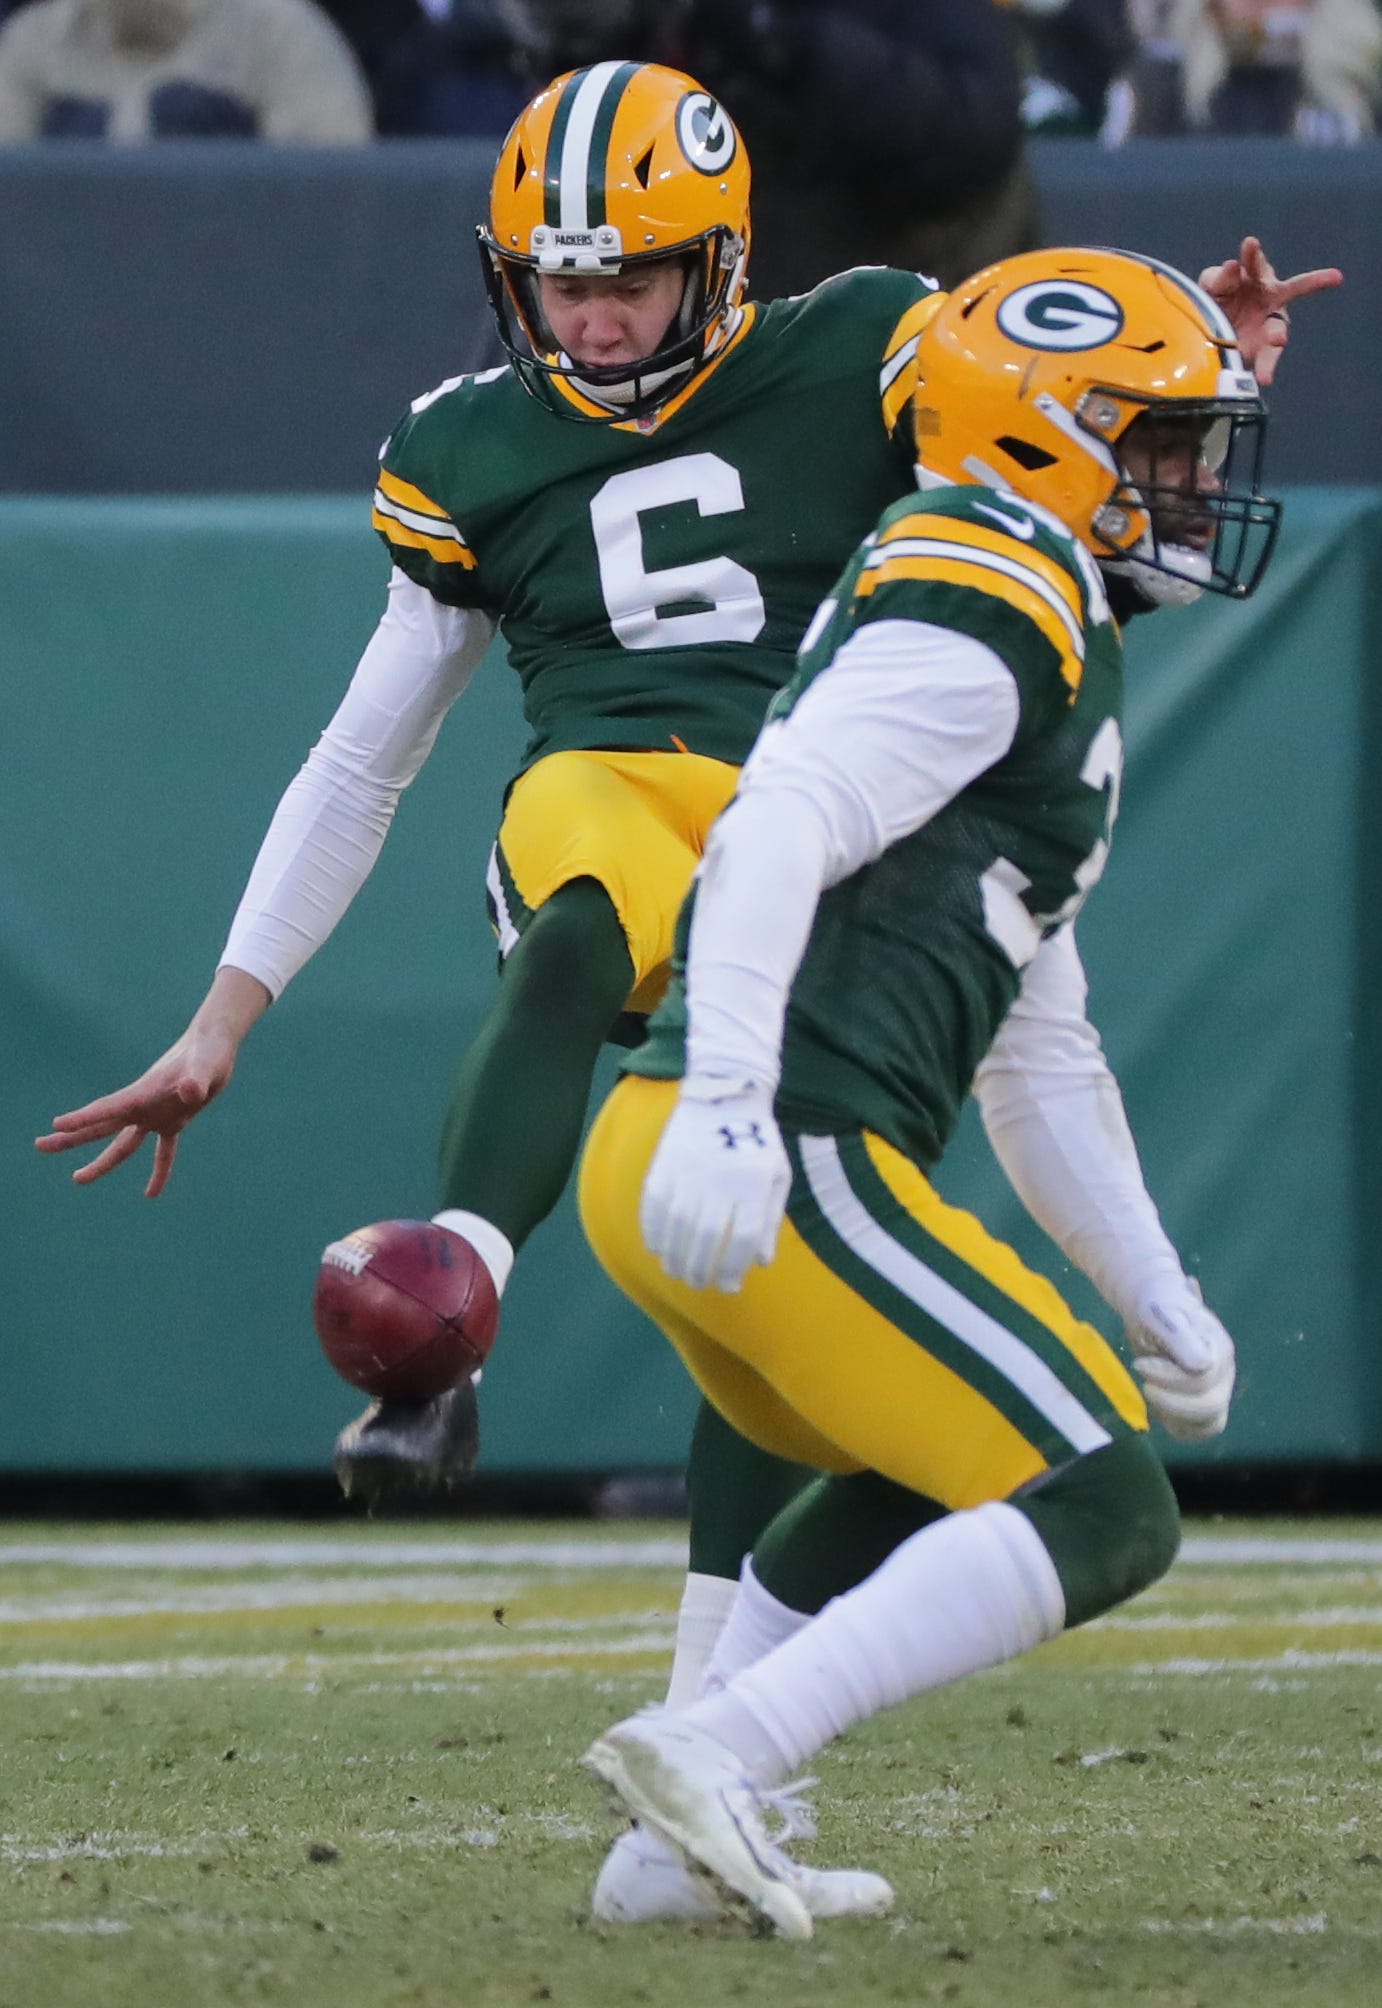 Green Bay Packers punter J.K. Scott (6) punts the ball during the fourth quarter of their game Sunday, December 15, 2019 at Lambeau Field in Green Bay, Wis. The Green Bay Packers beat the Chicago Bears 21-13.